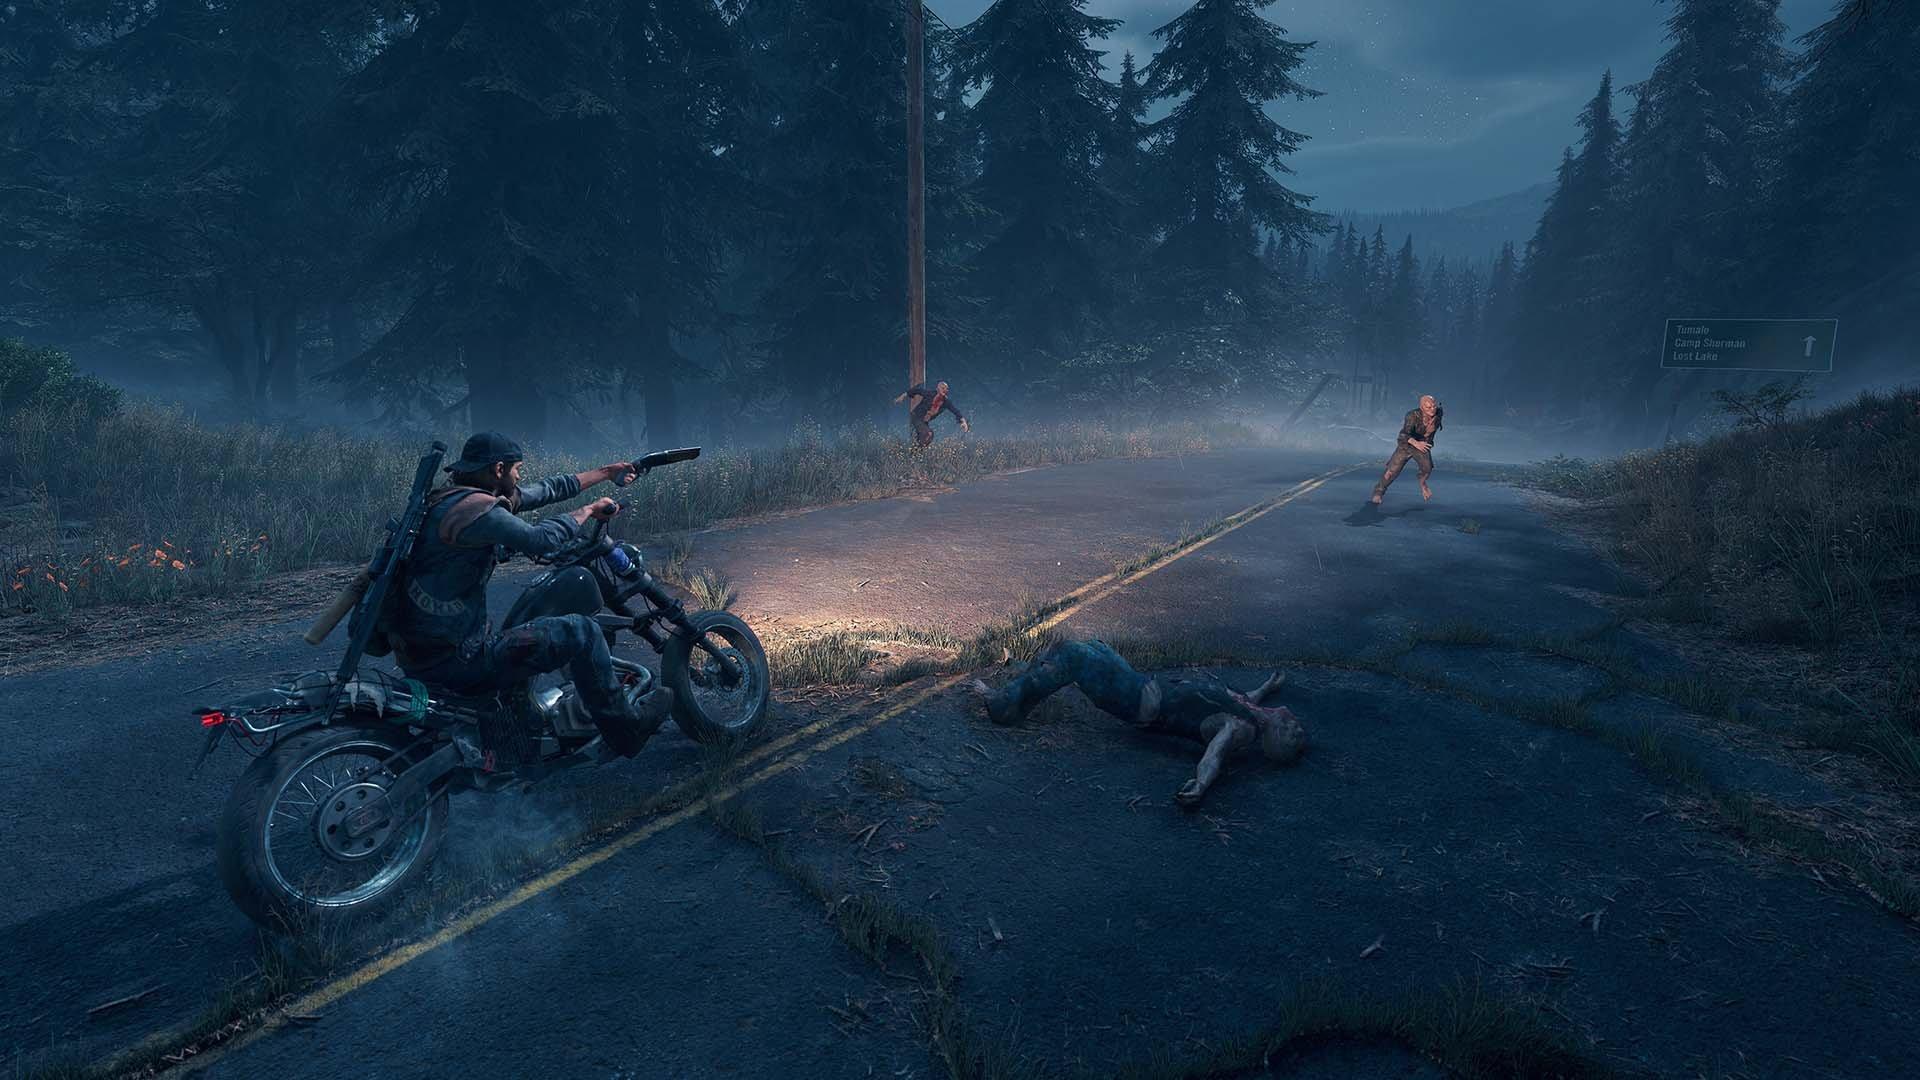 Days Gone (PS4) cheap - Price of $13.58